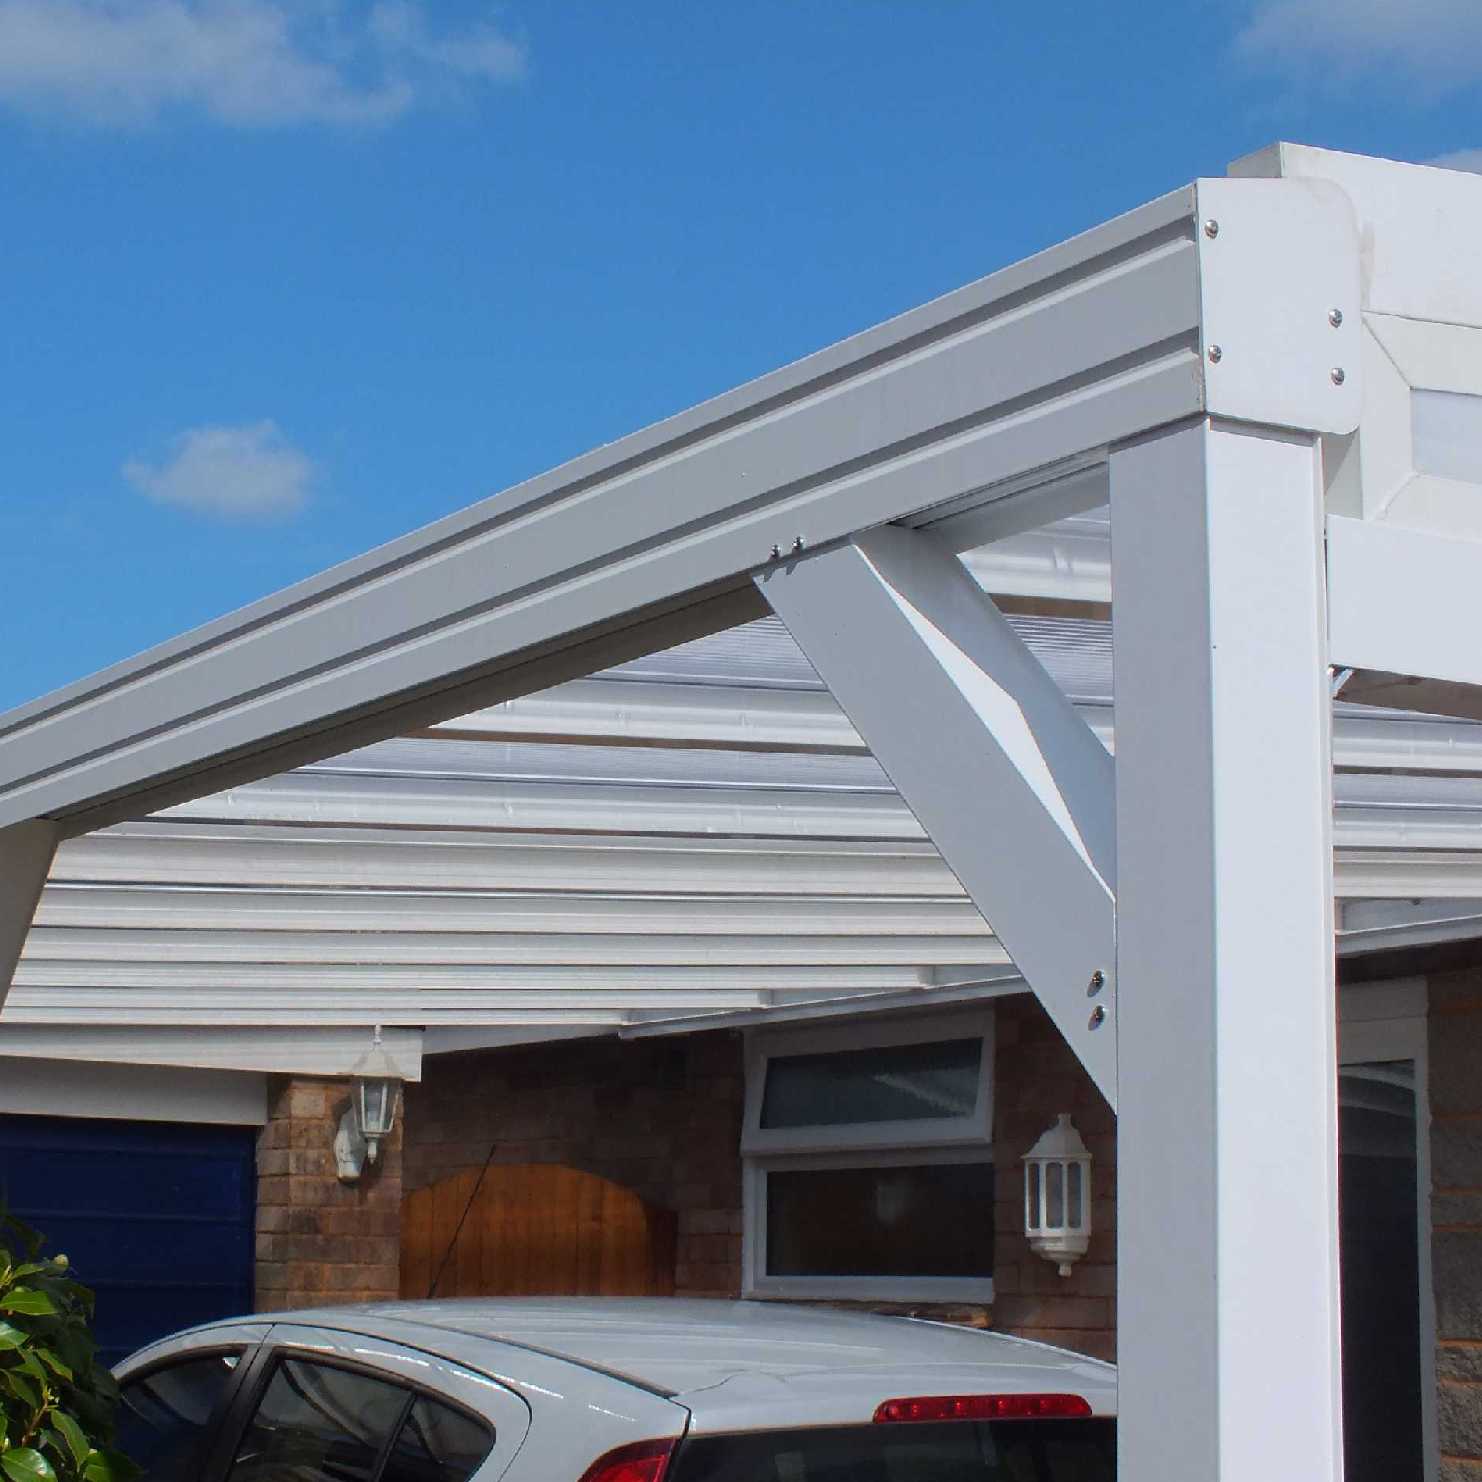 Great deals on Omega Smart Lean-To Canopy, White with 16mm Polycarbonate Glazing - 6.0m (W) x 3.5m (P), (3) Supporting Posts